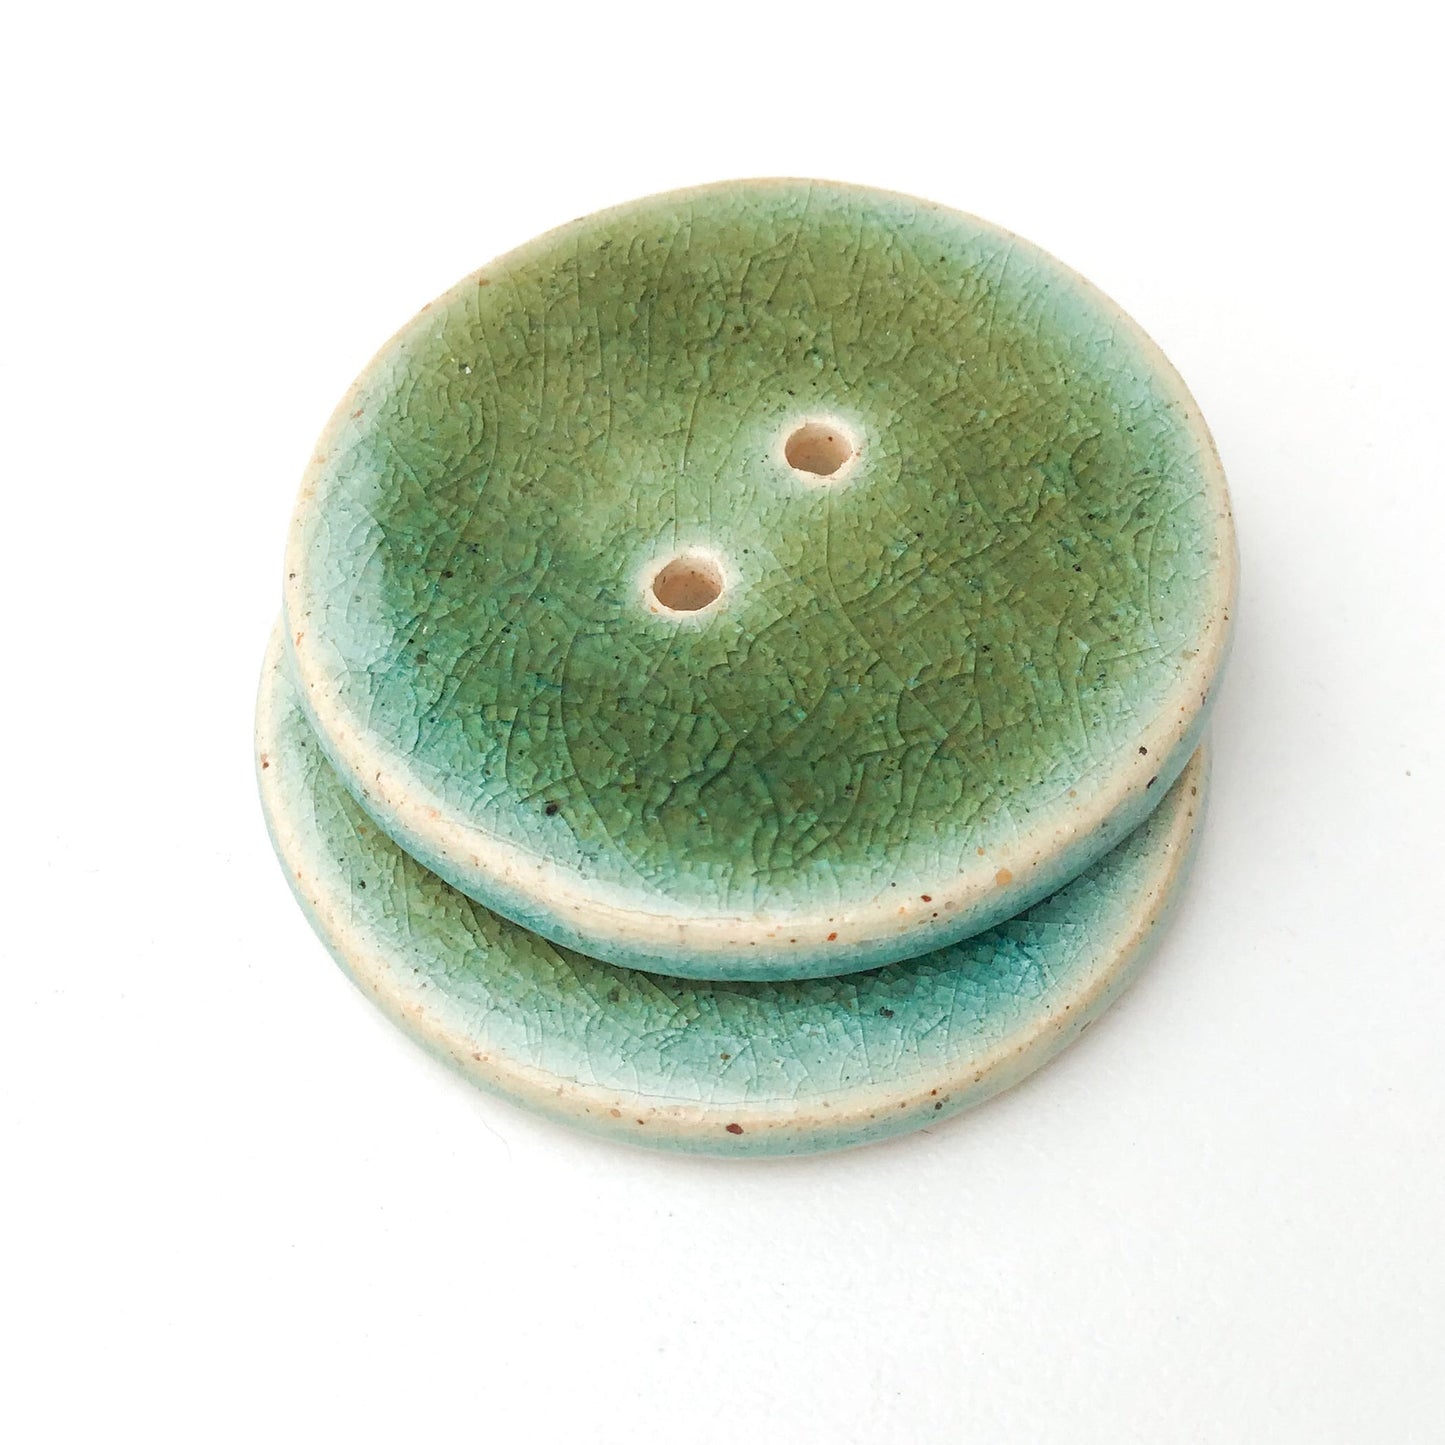 (Wholesale Accounts Only) 1 3/8" Blue Green Crackle - flat - buff clay